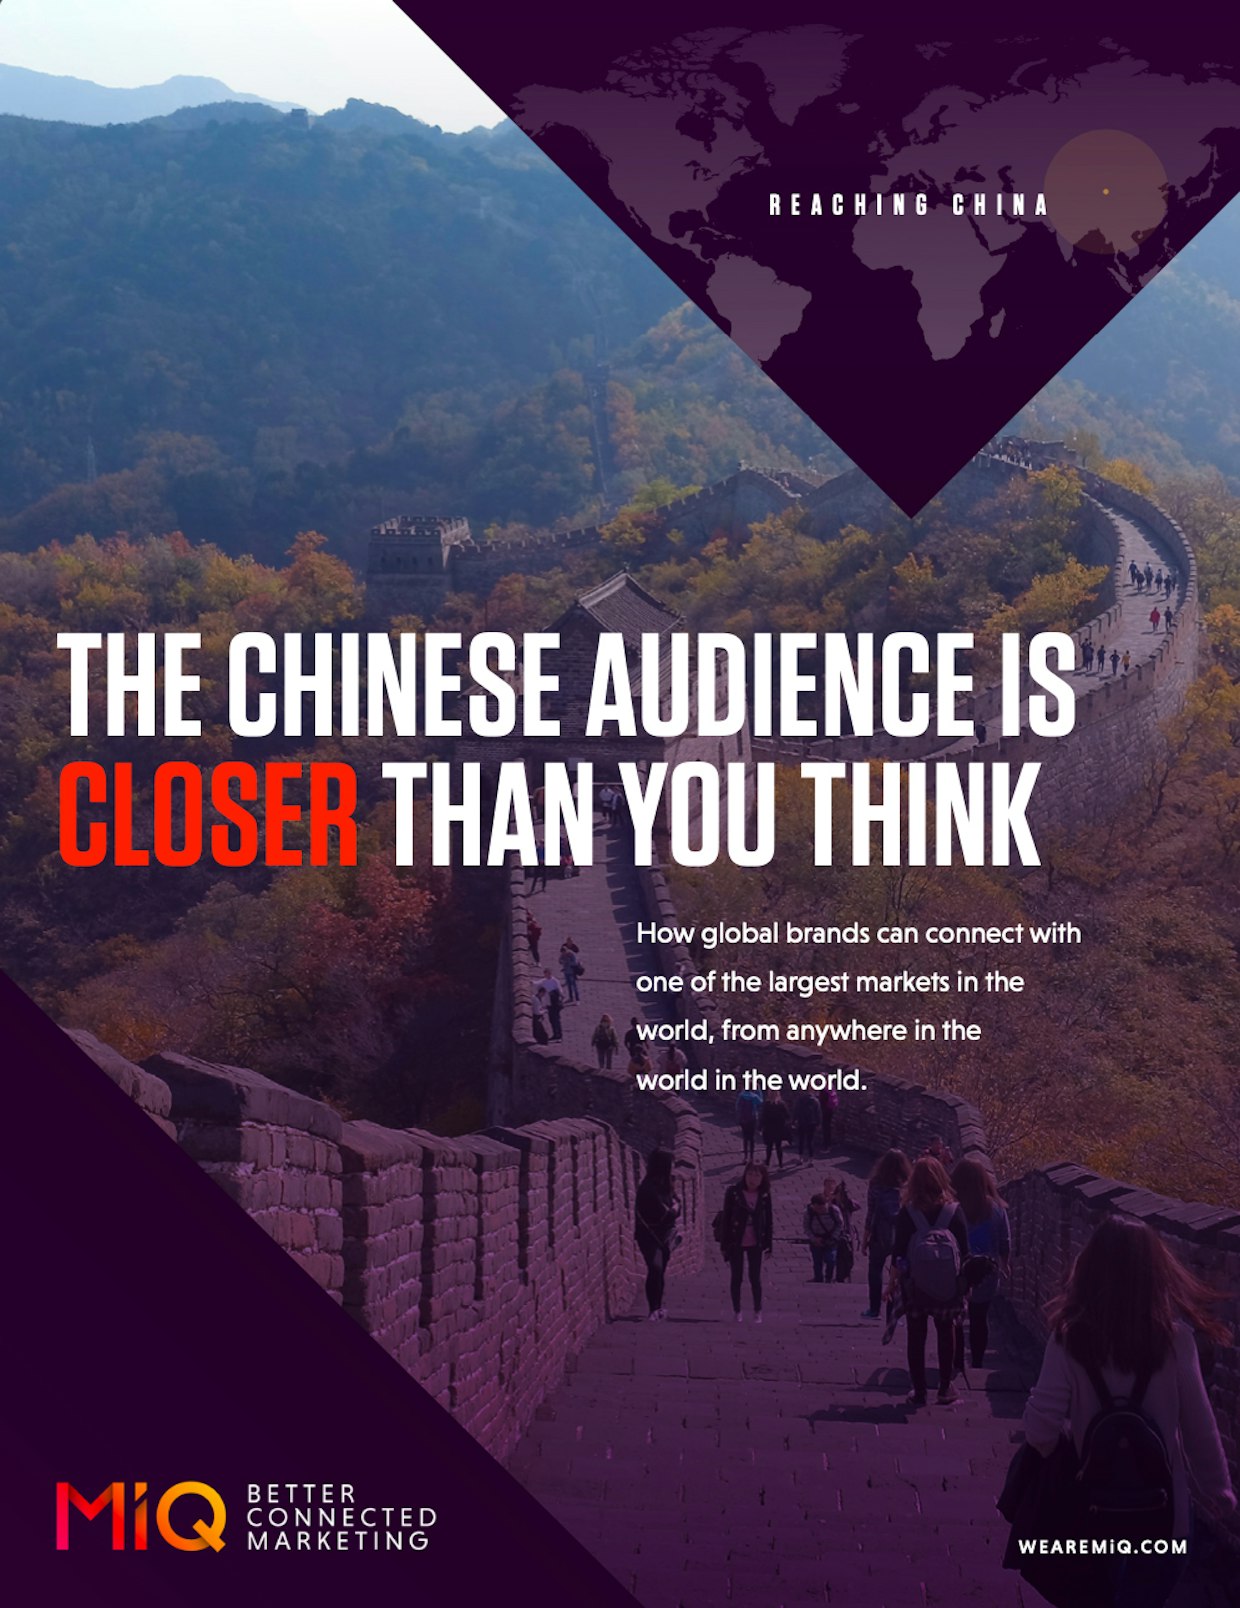 The Chinese audience is closer than you think